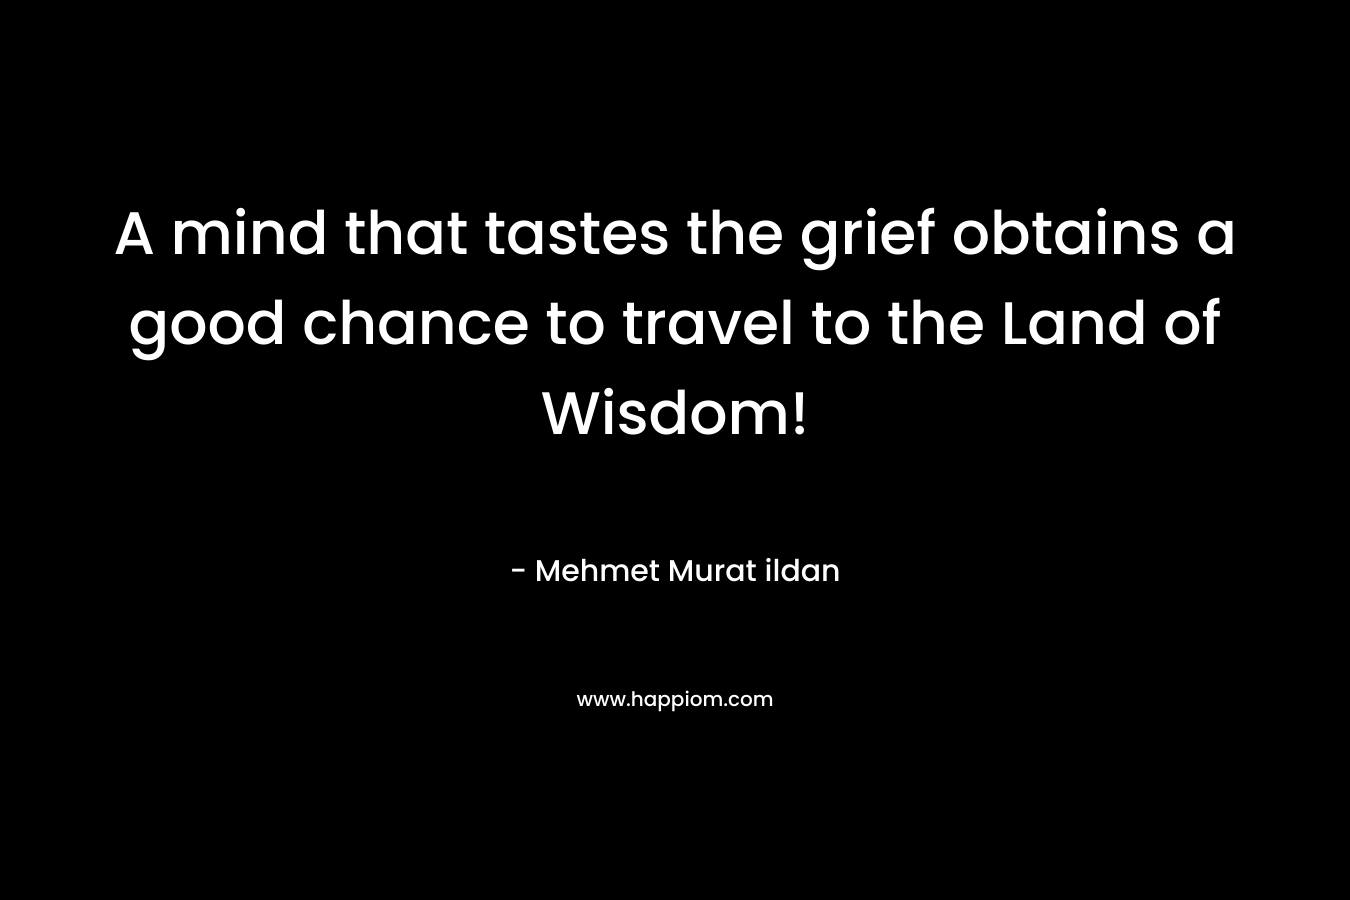 A mind that tastes the grief obtains a good chance to travel to the Land of Wisdom!